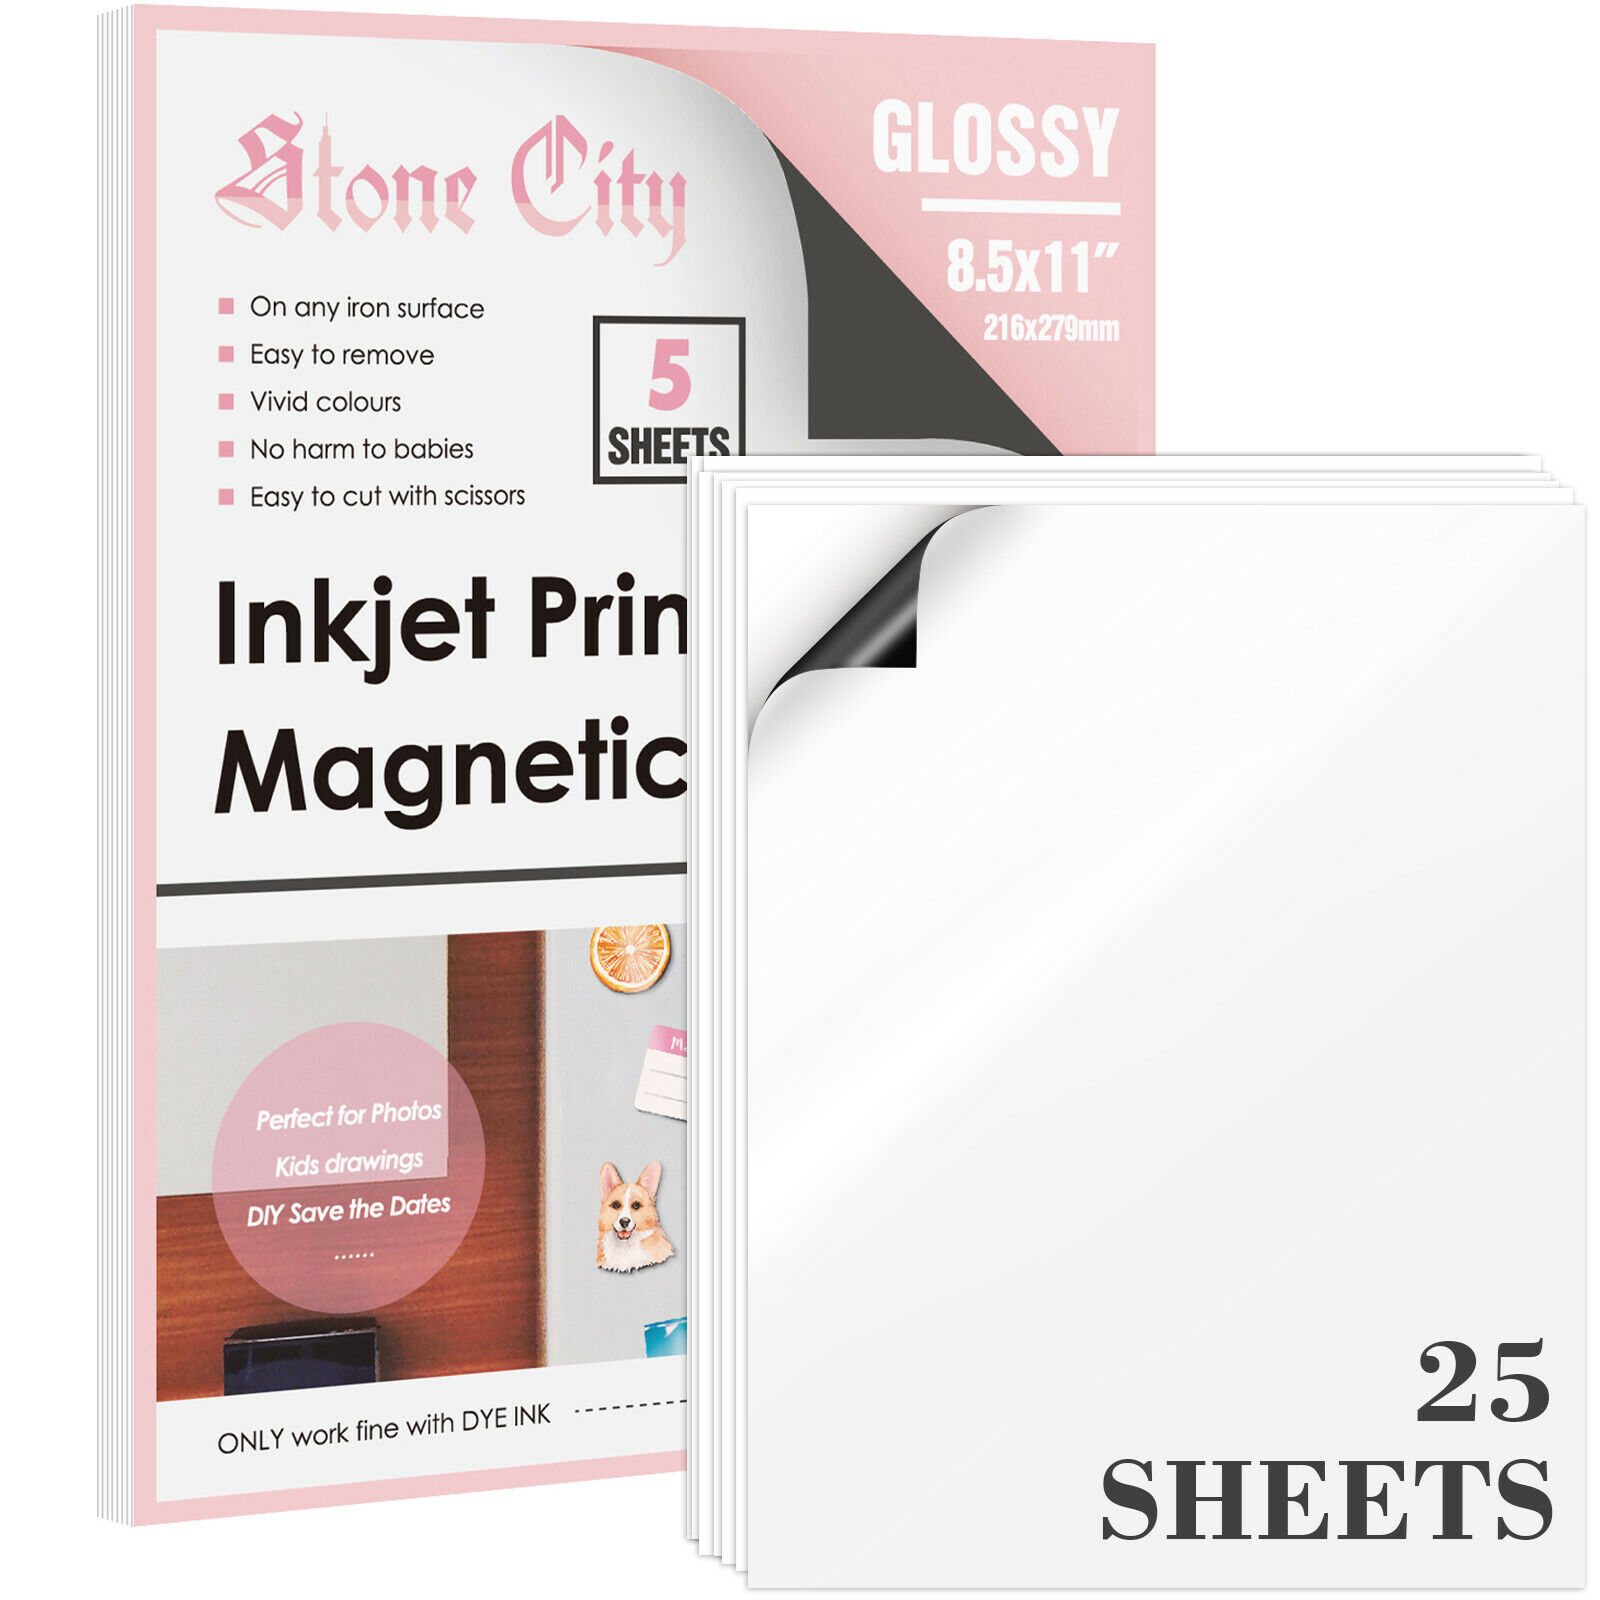 Glossy White Printable Magnet Paper 25 Sheets for Inkjet Printer Cutable 8.5x11